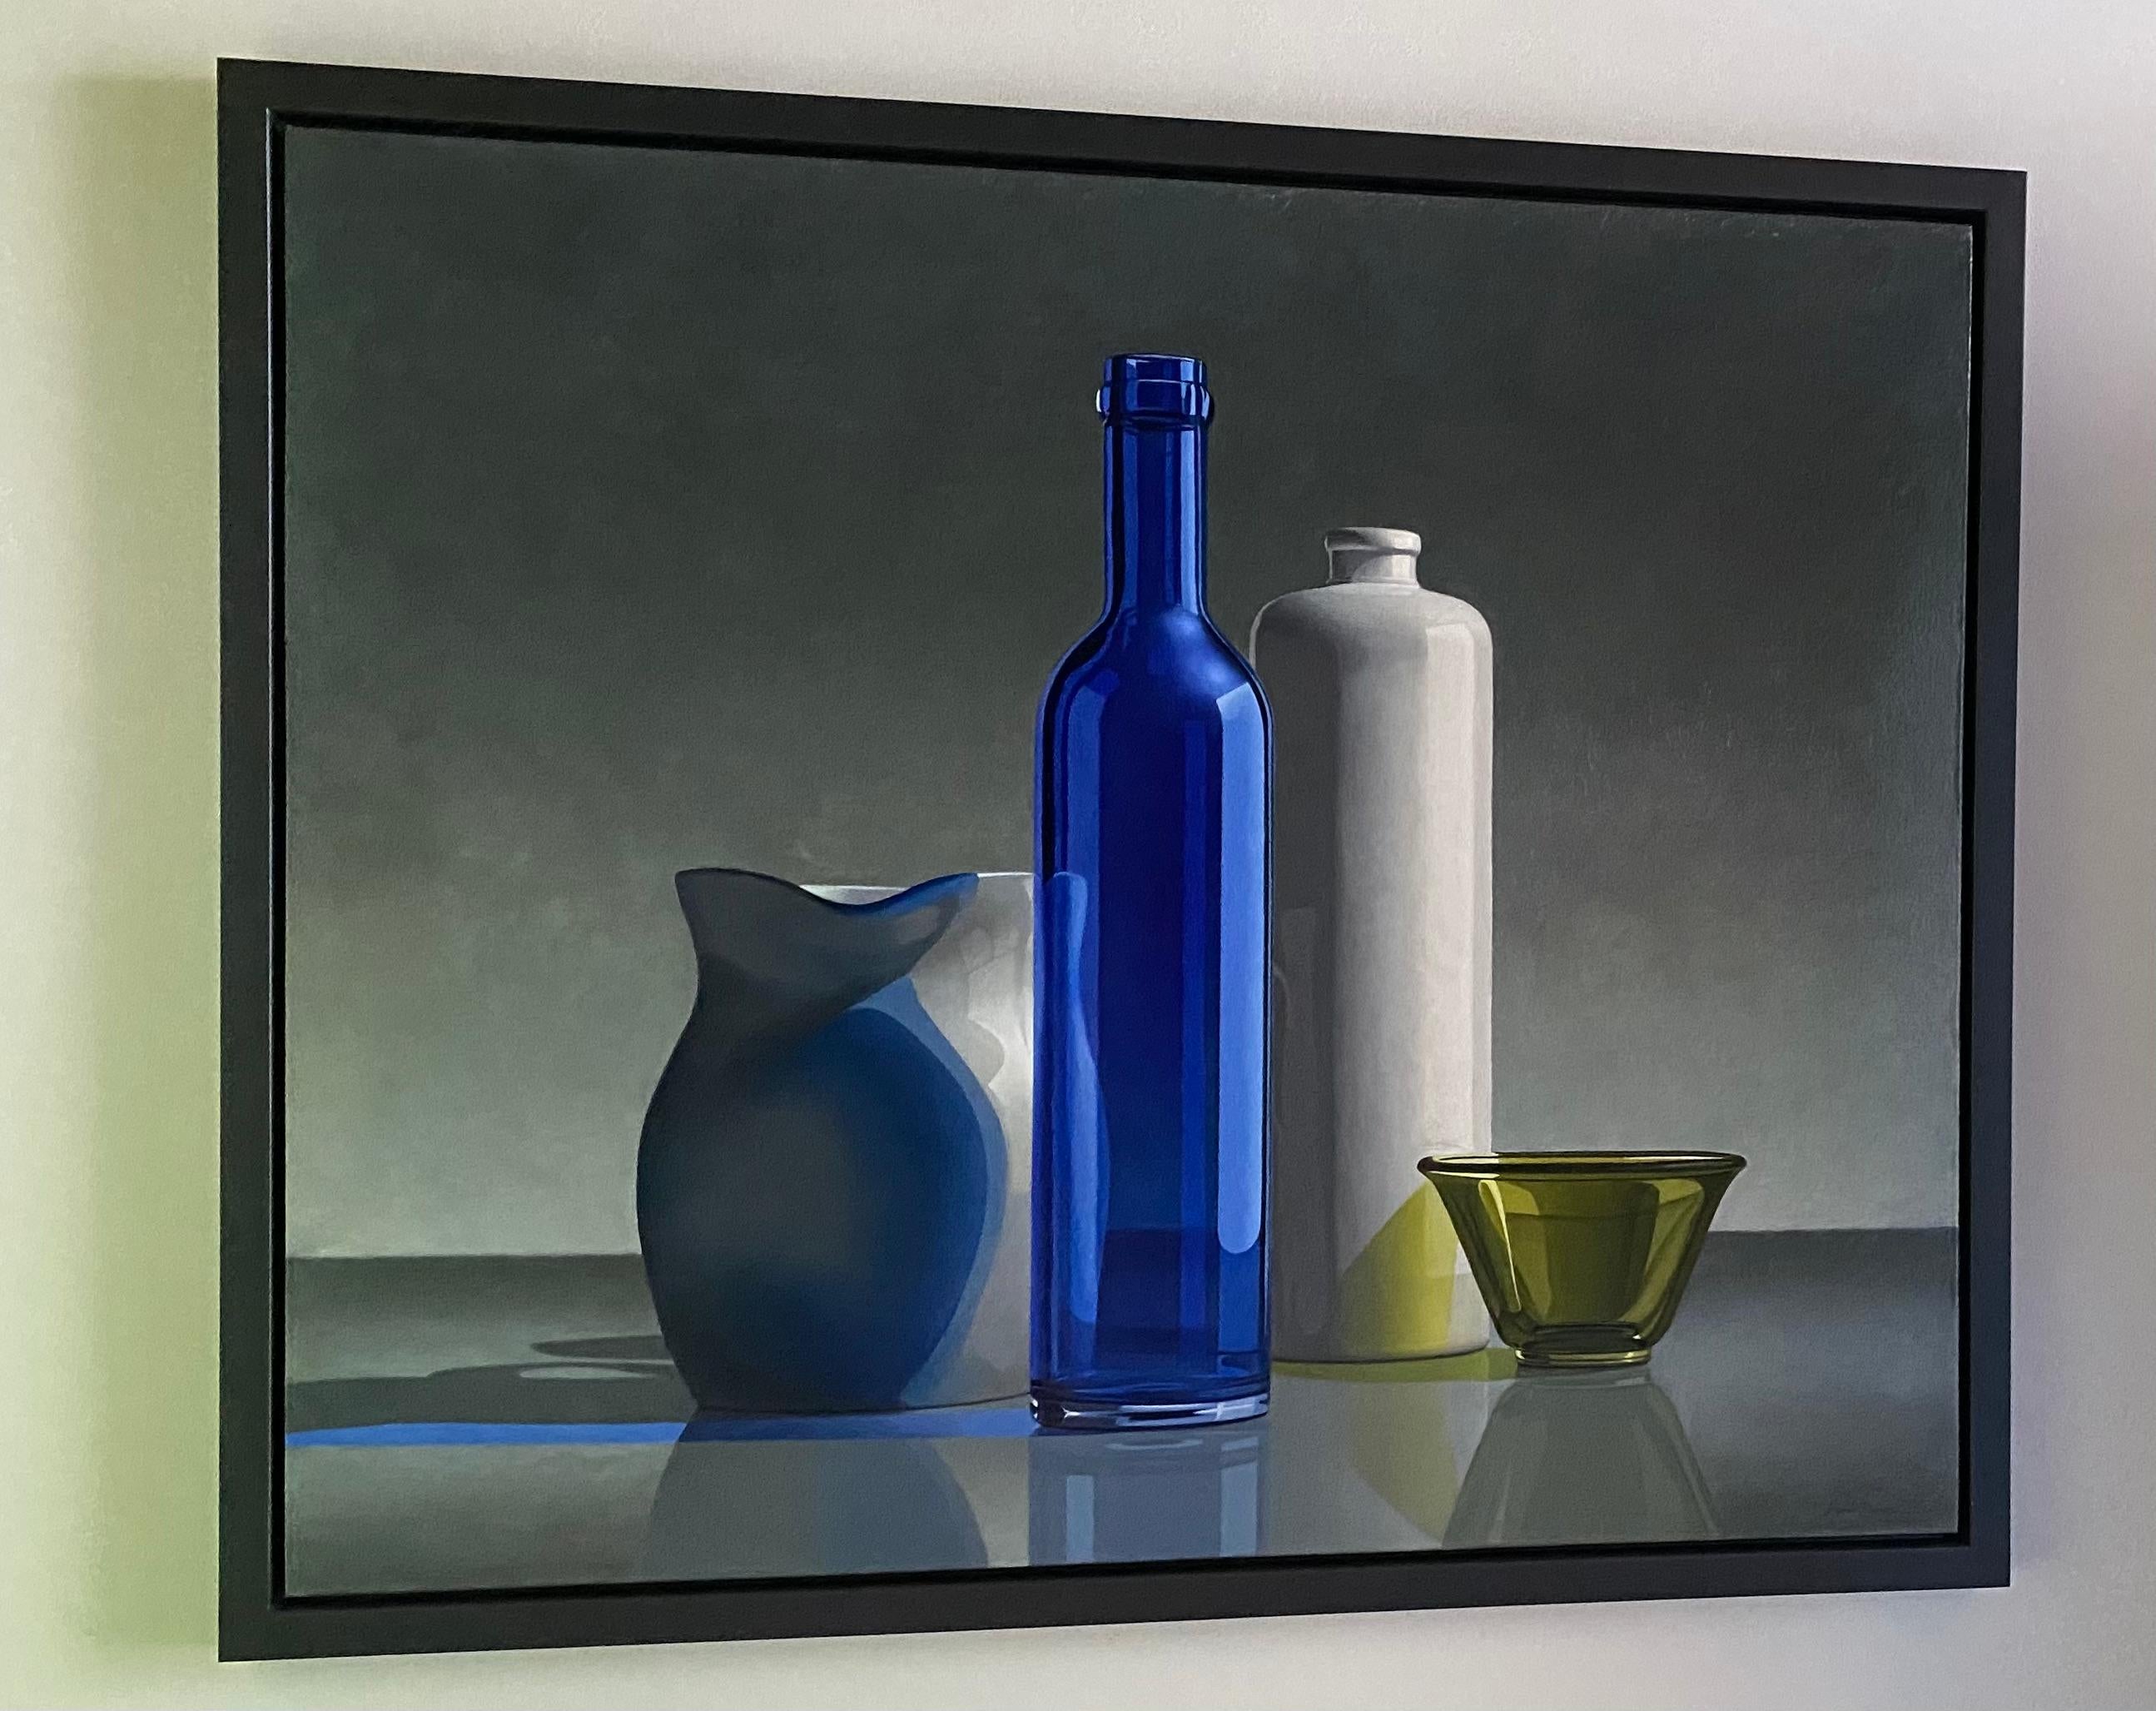 Composition in Blue and Green- 21st Century Dutch Realistic Still-life painting - Contemporary Painting by Henk Boon